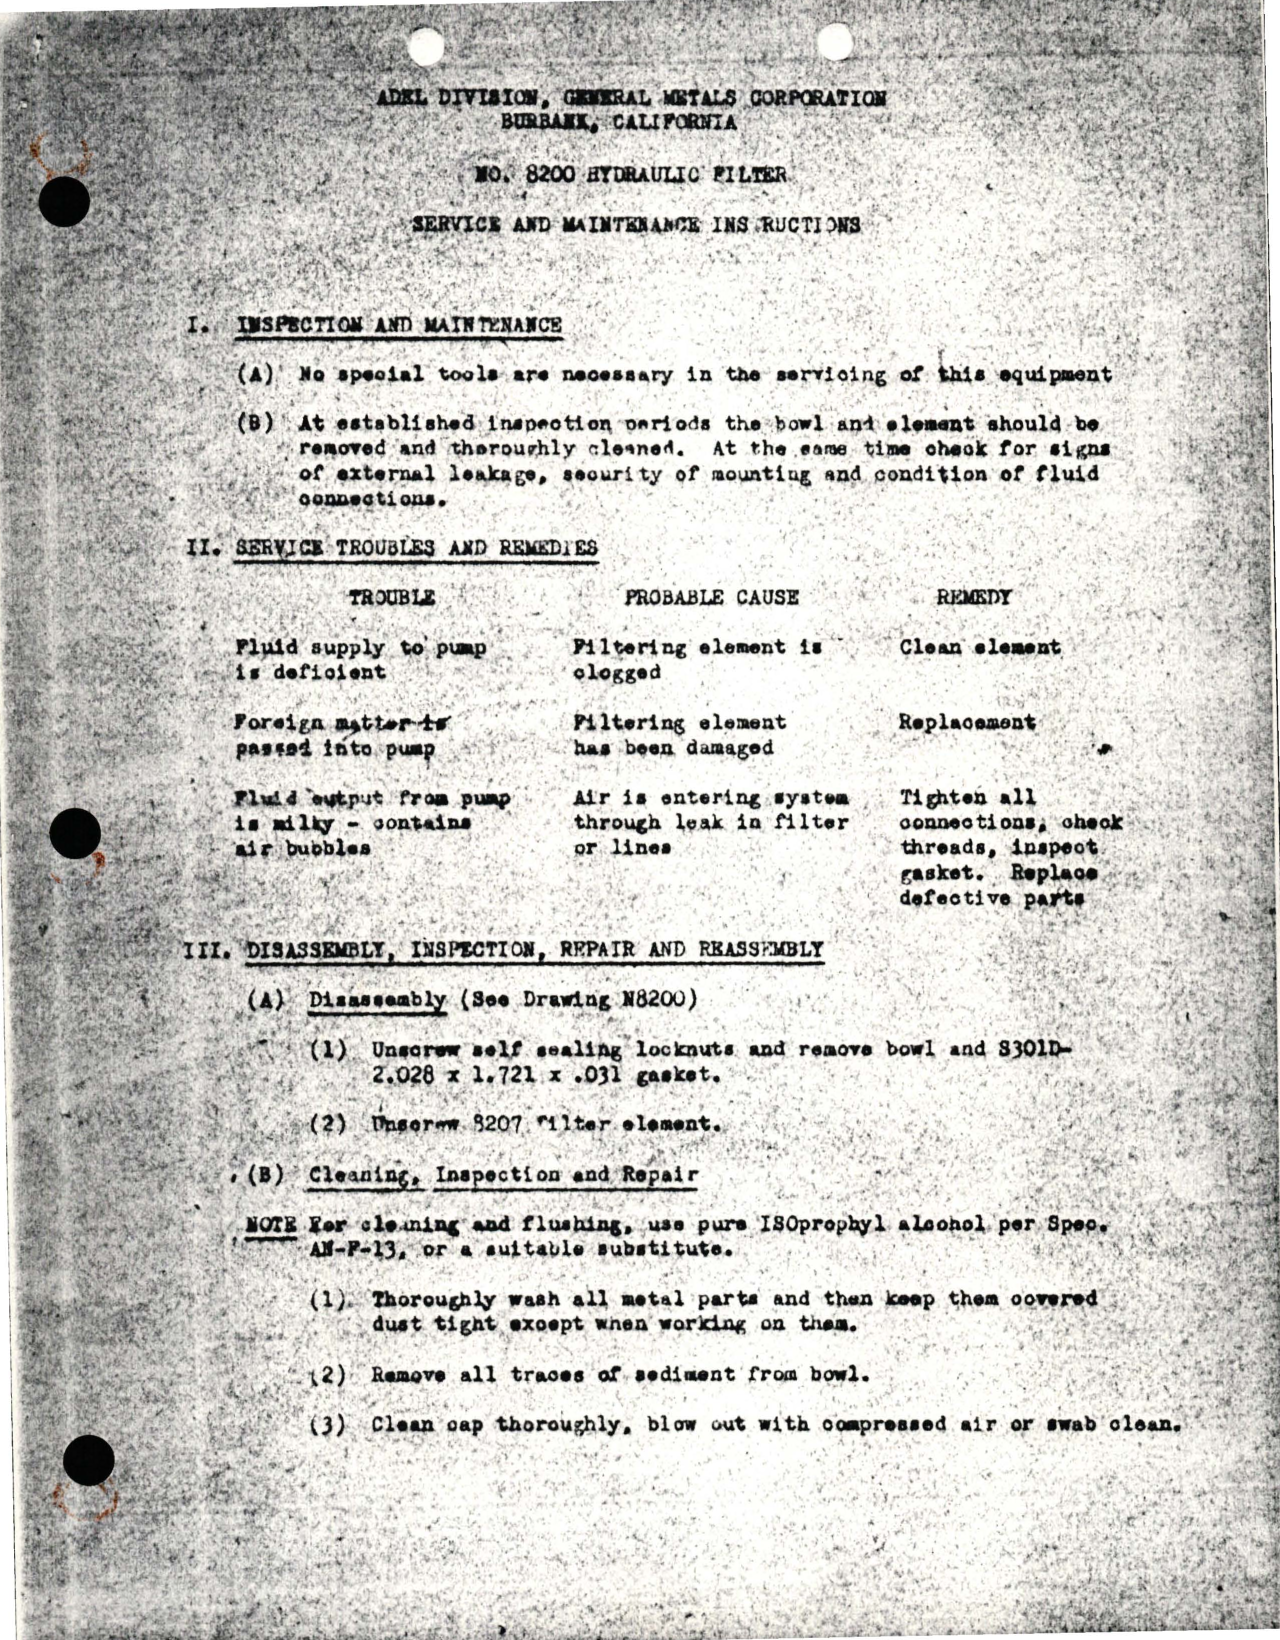 Sample page 1 from AirCorps Library document: Service and Maintenance Instructions for Hydraulic Filter - No. 8200